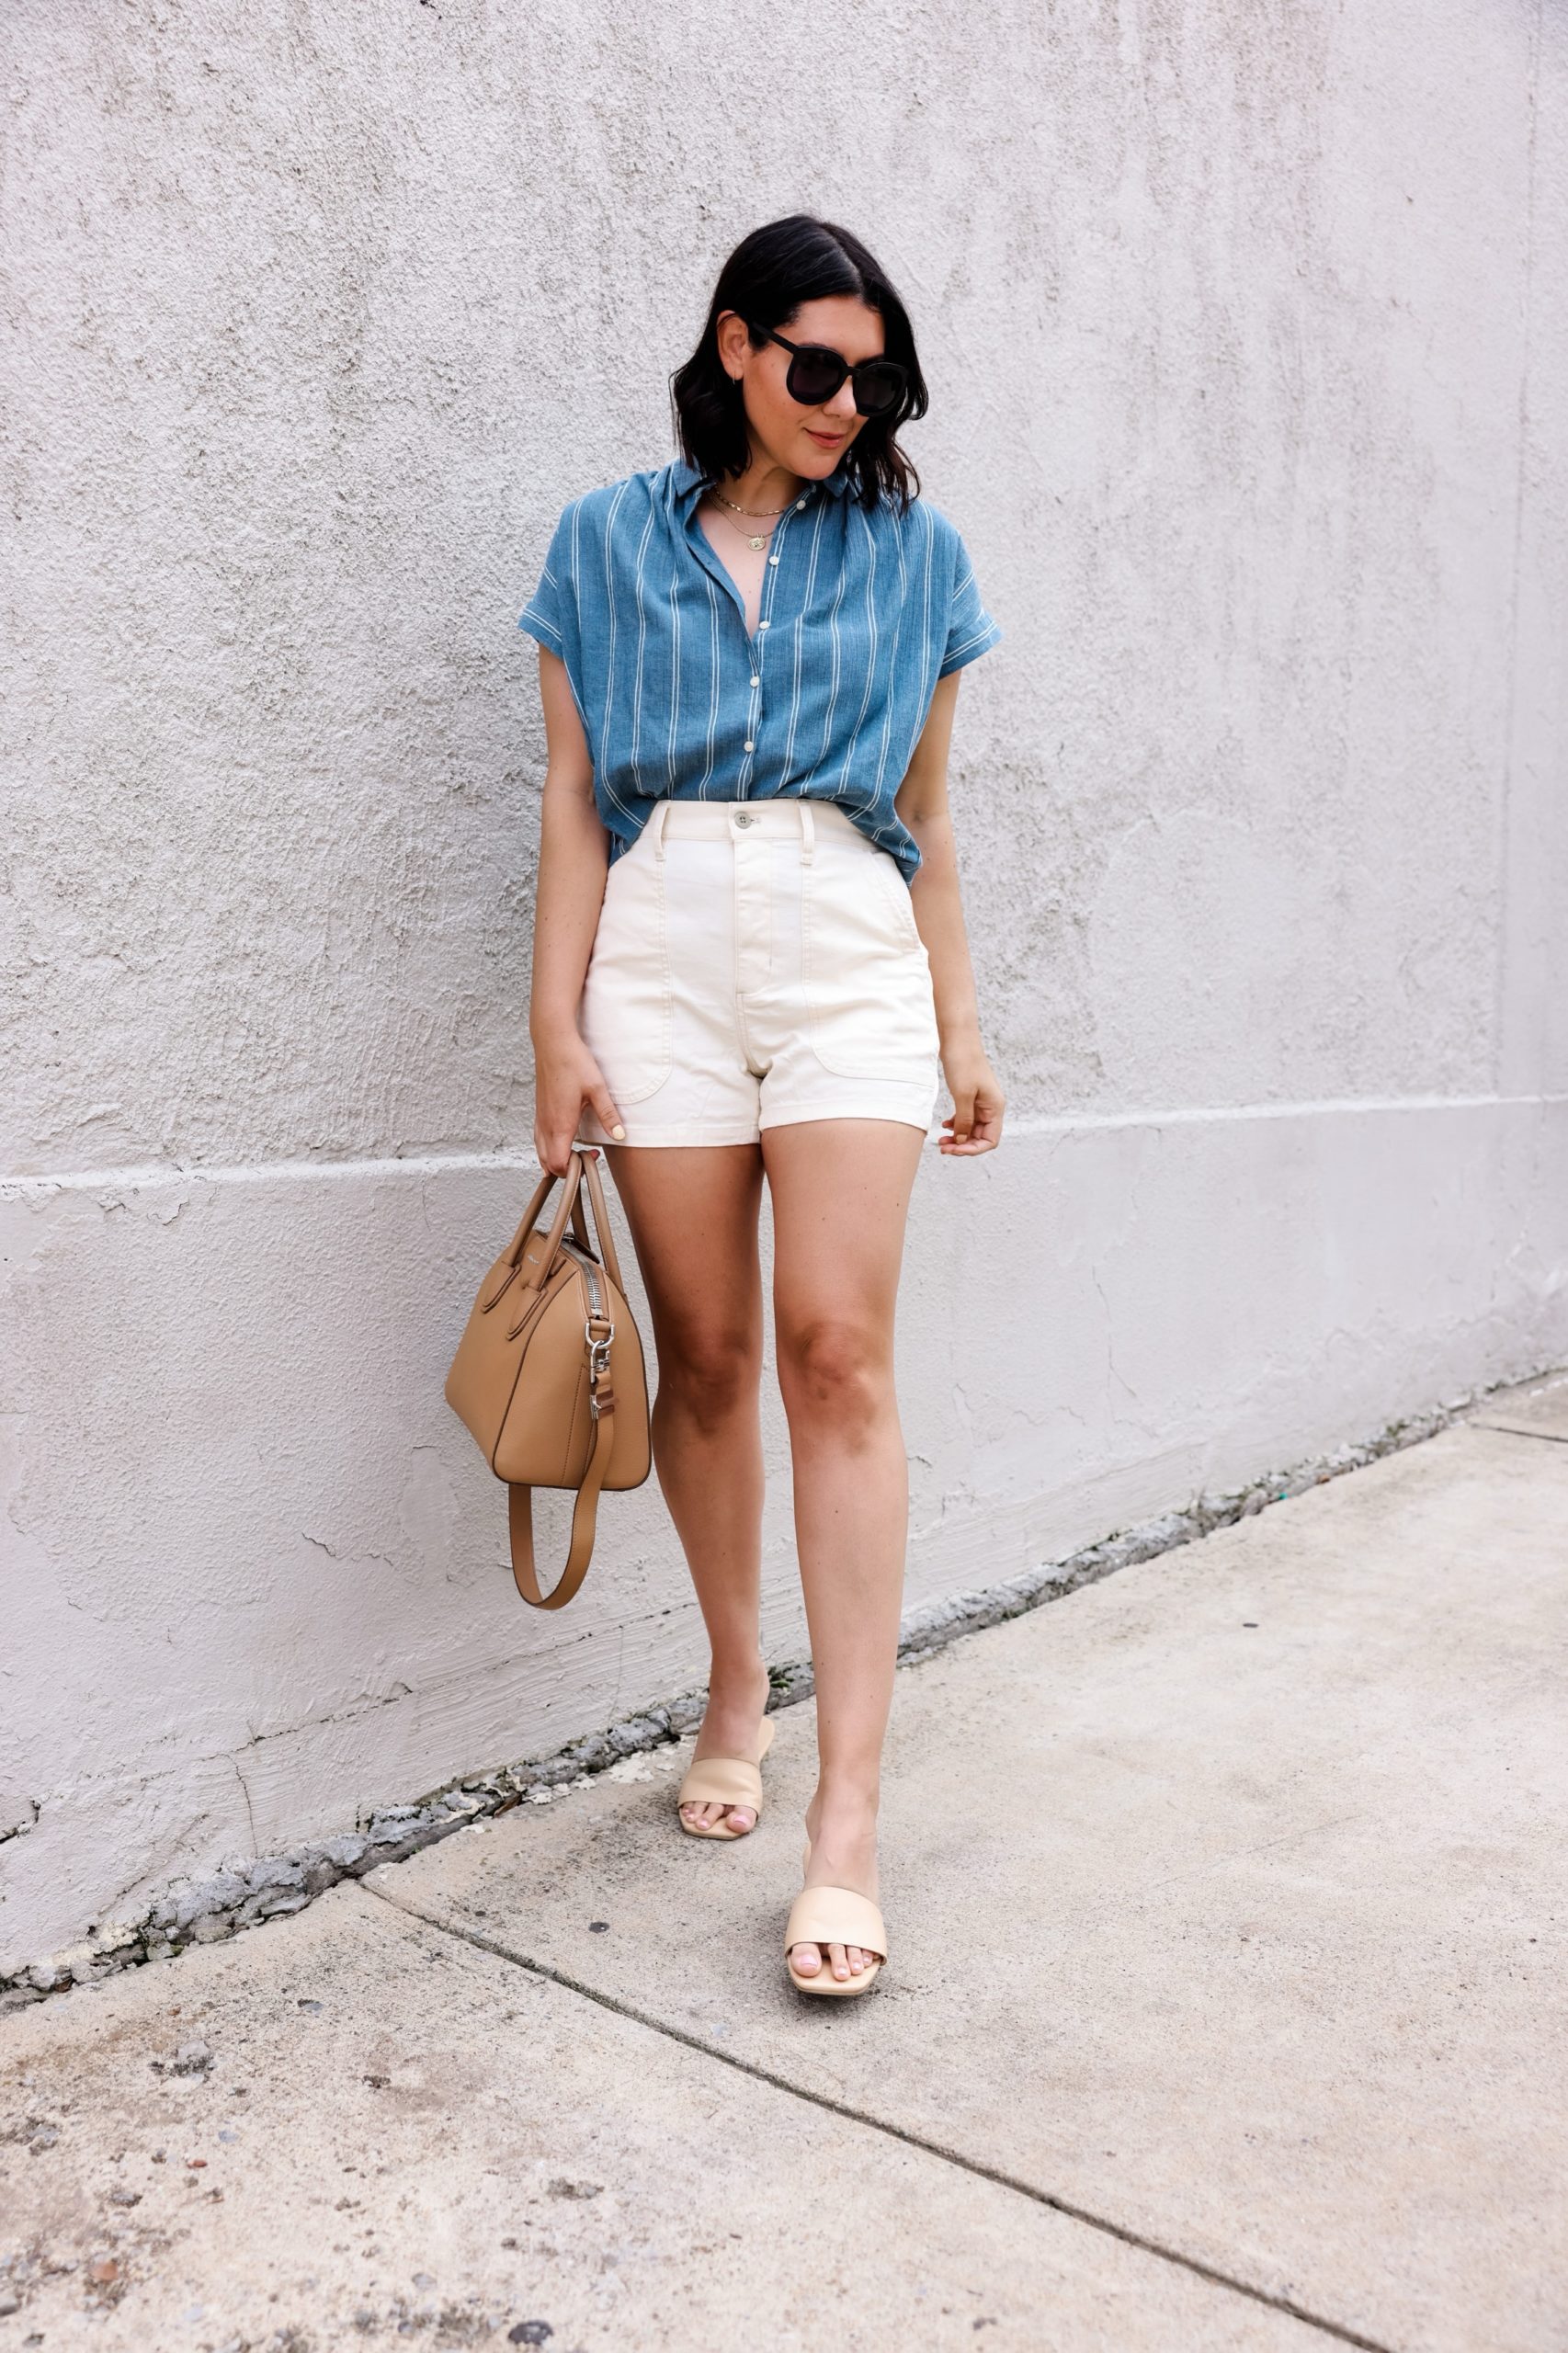 https://www.kendieveryday.com/wp-content/uploads/2021/06/Kendi-Everyday-wearing-Madewell-Central-Shirt-and-Madewell-Utility-Shorts_03-scaled.jpg